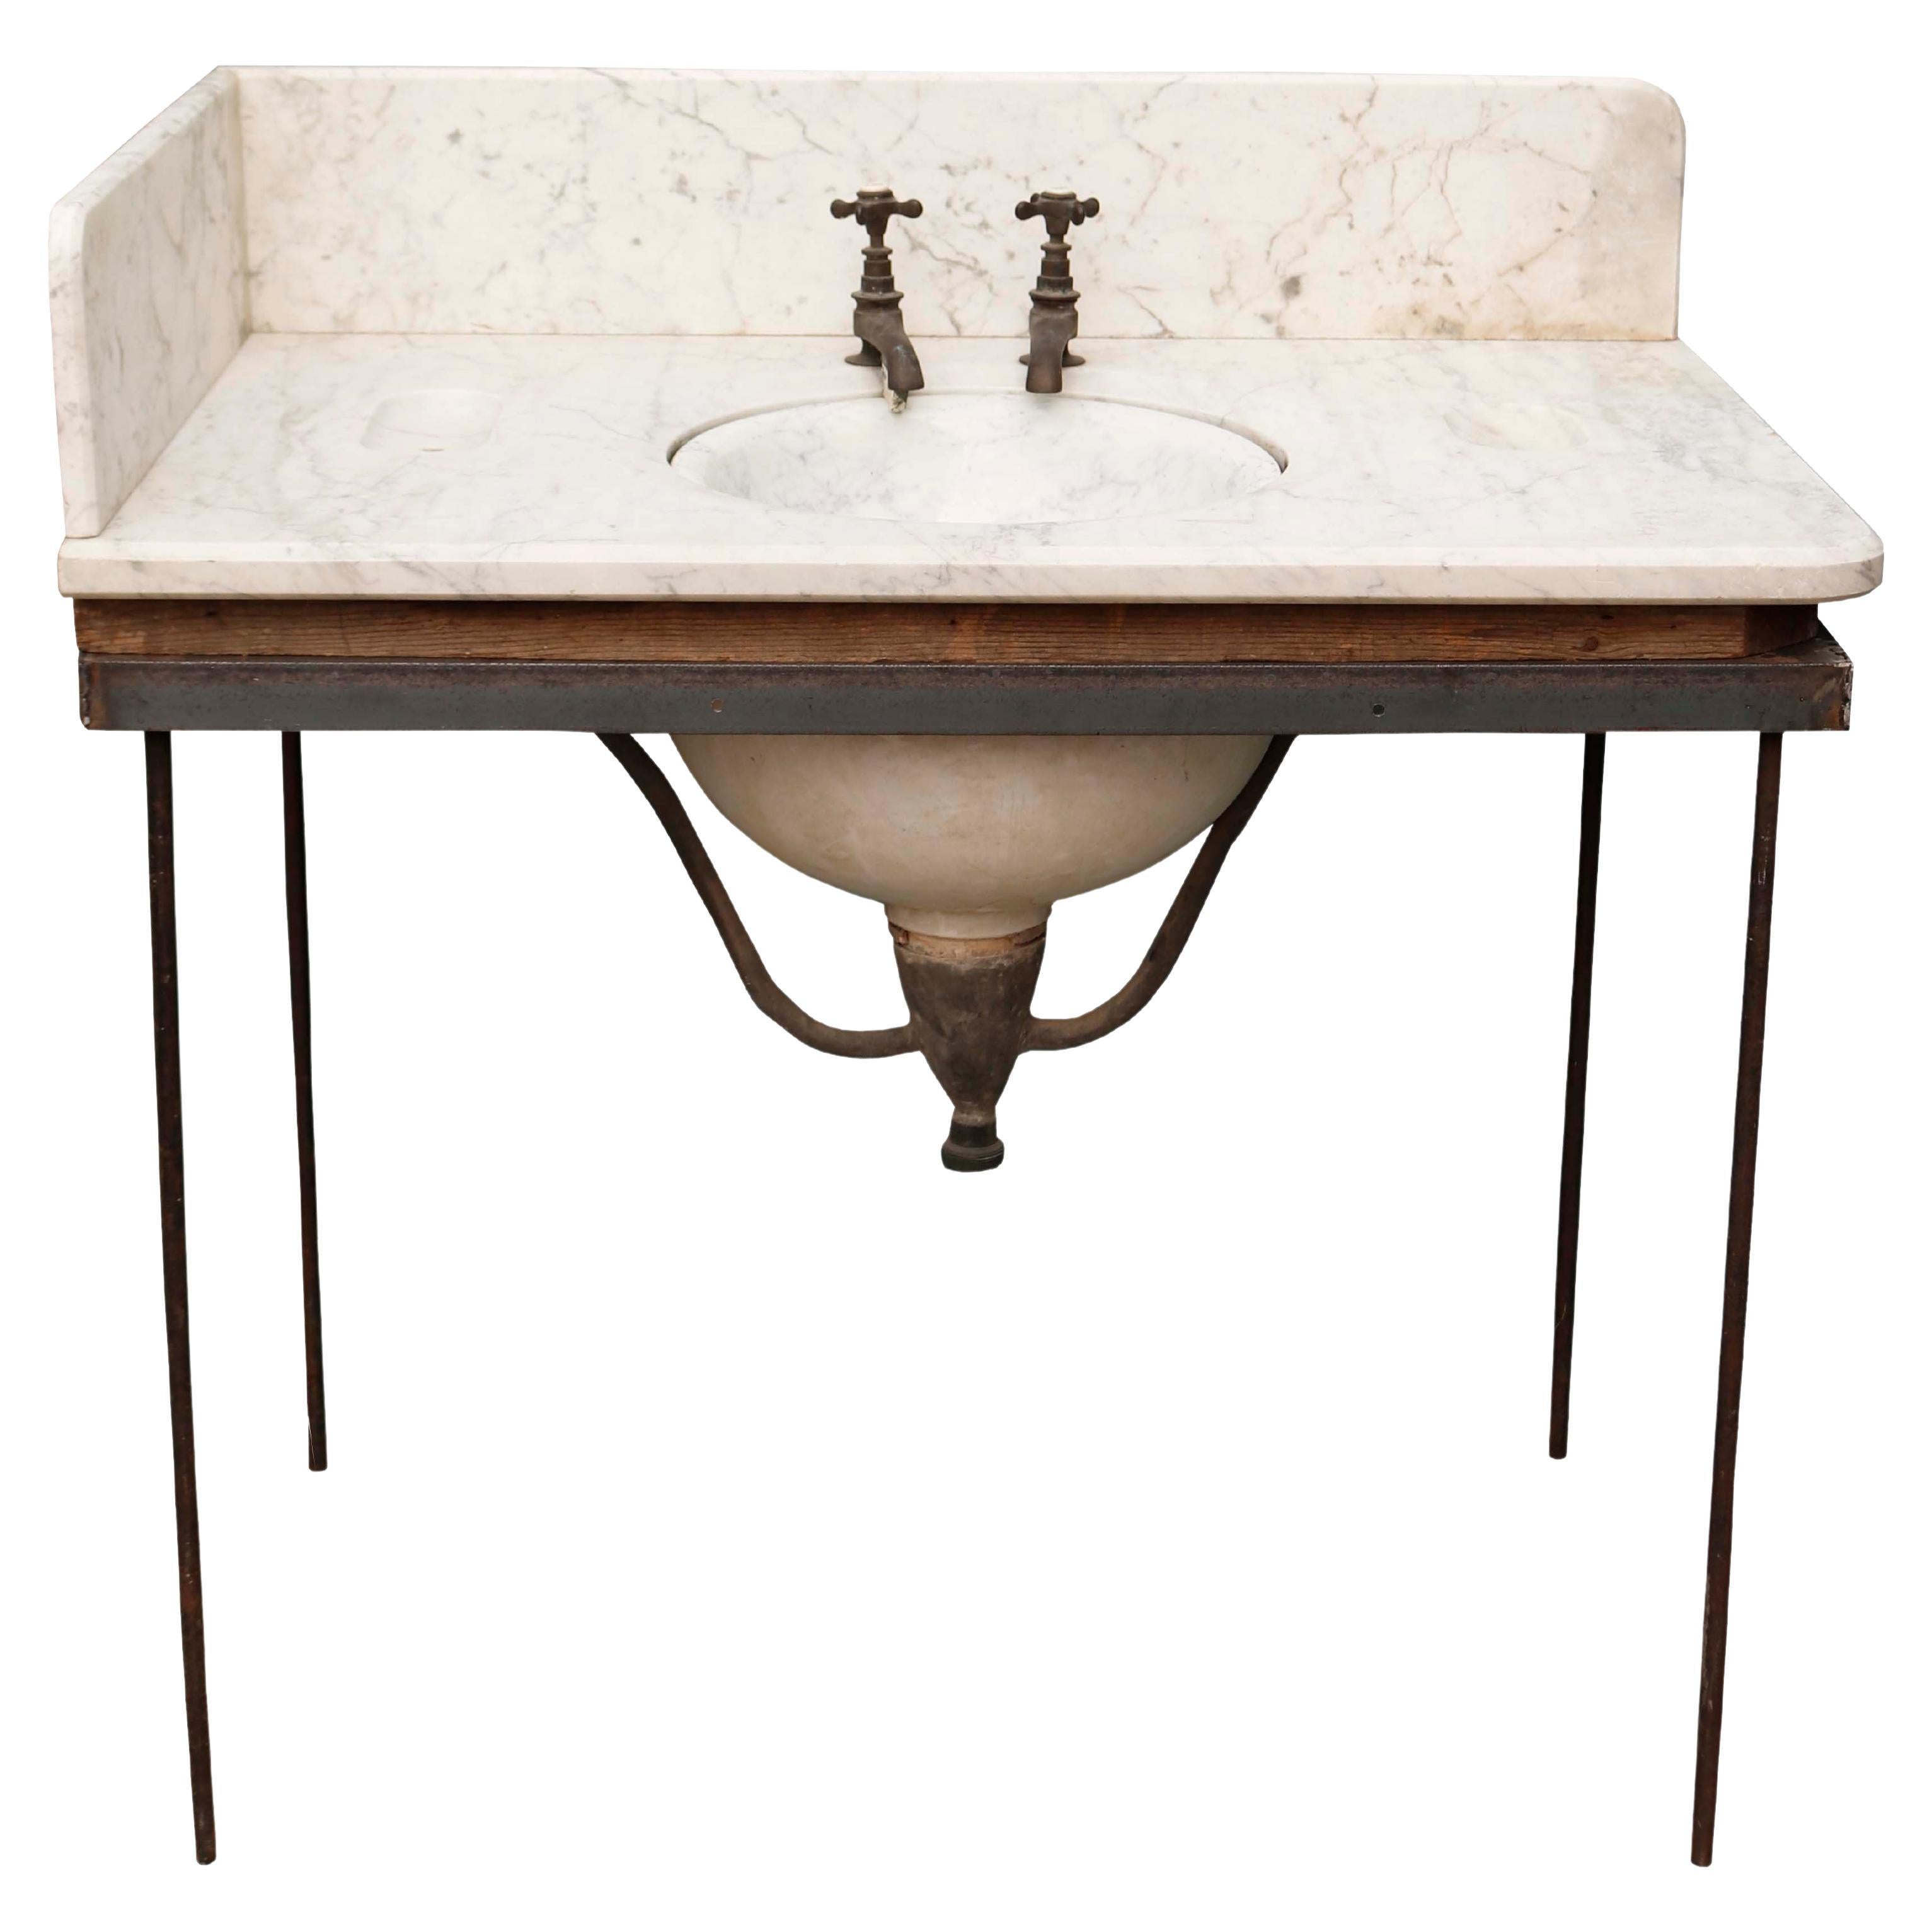 George Jennings Marble Liftup Sink